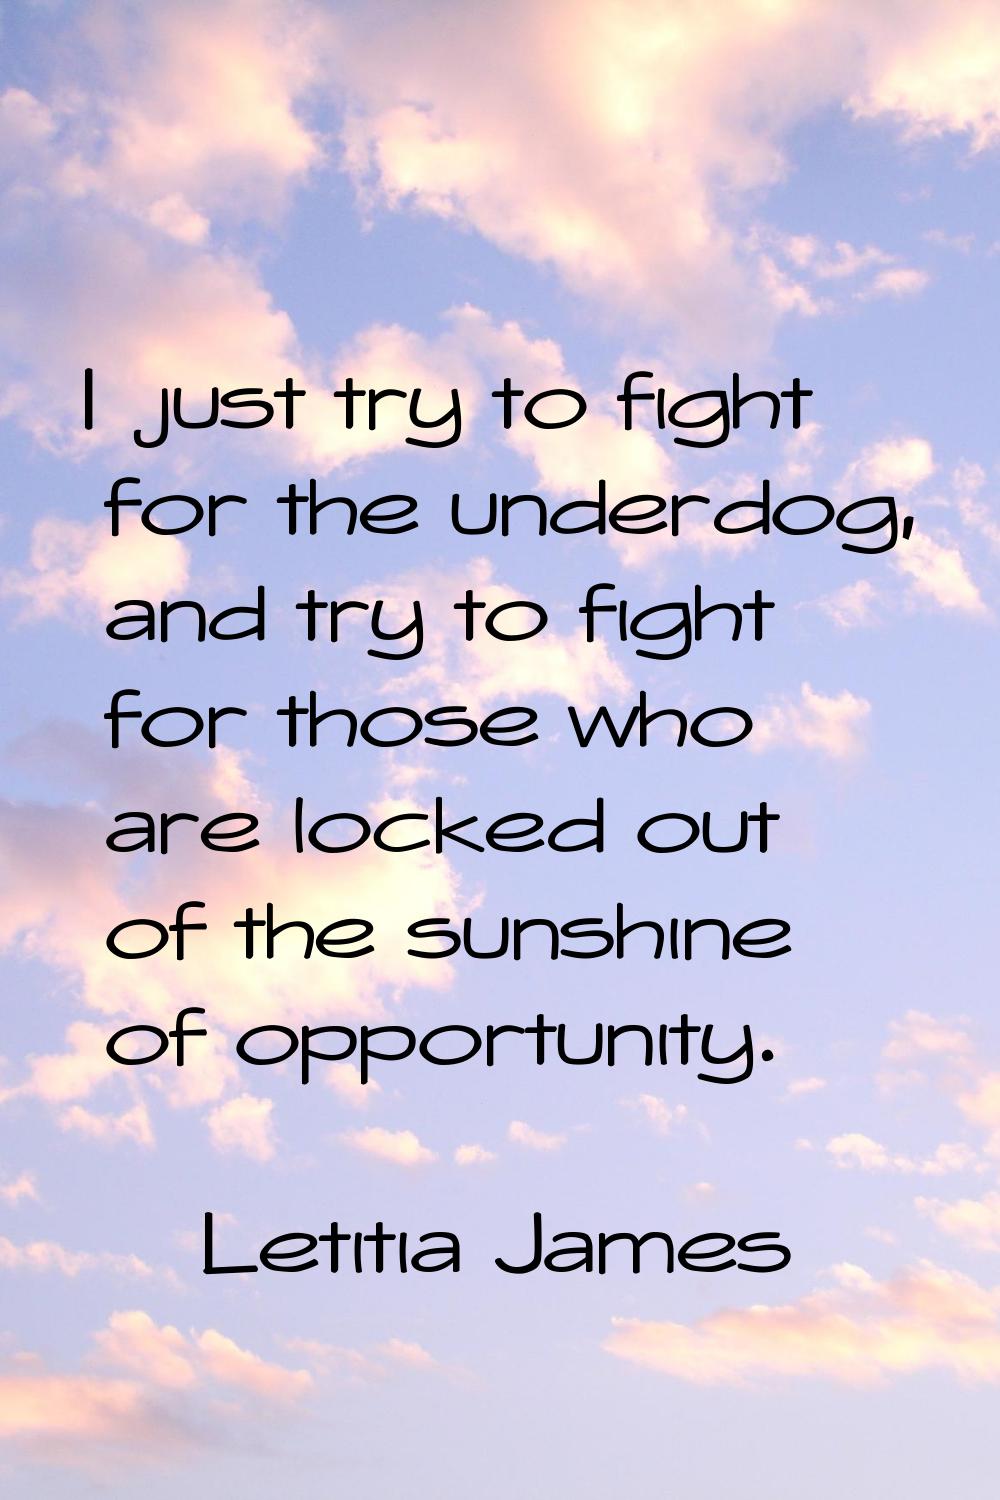 I just try to fight for the underdog, and try to fight for those who are locked out of the sunshine